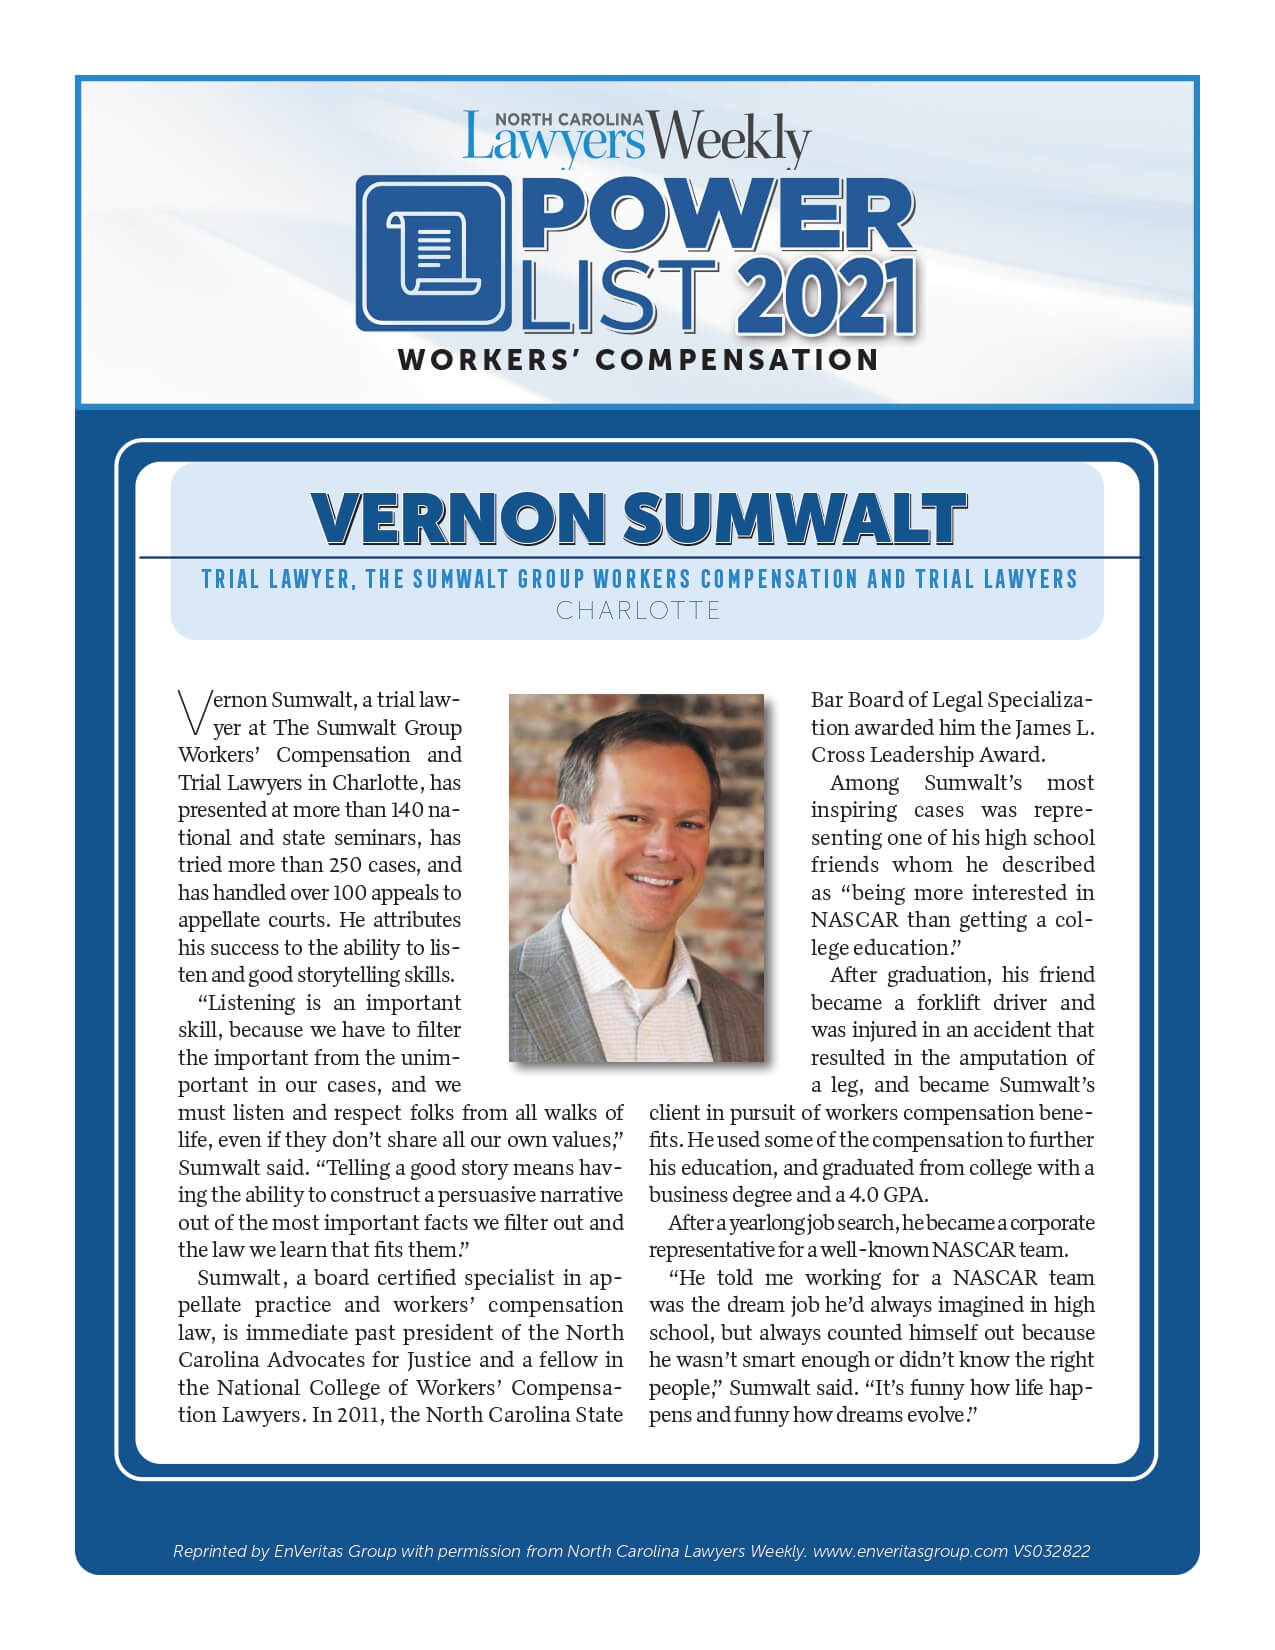 Image of Vernon Sumwalt with blog from Lawyers Weekly WC Power List